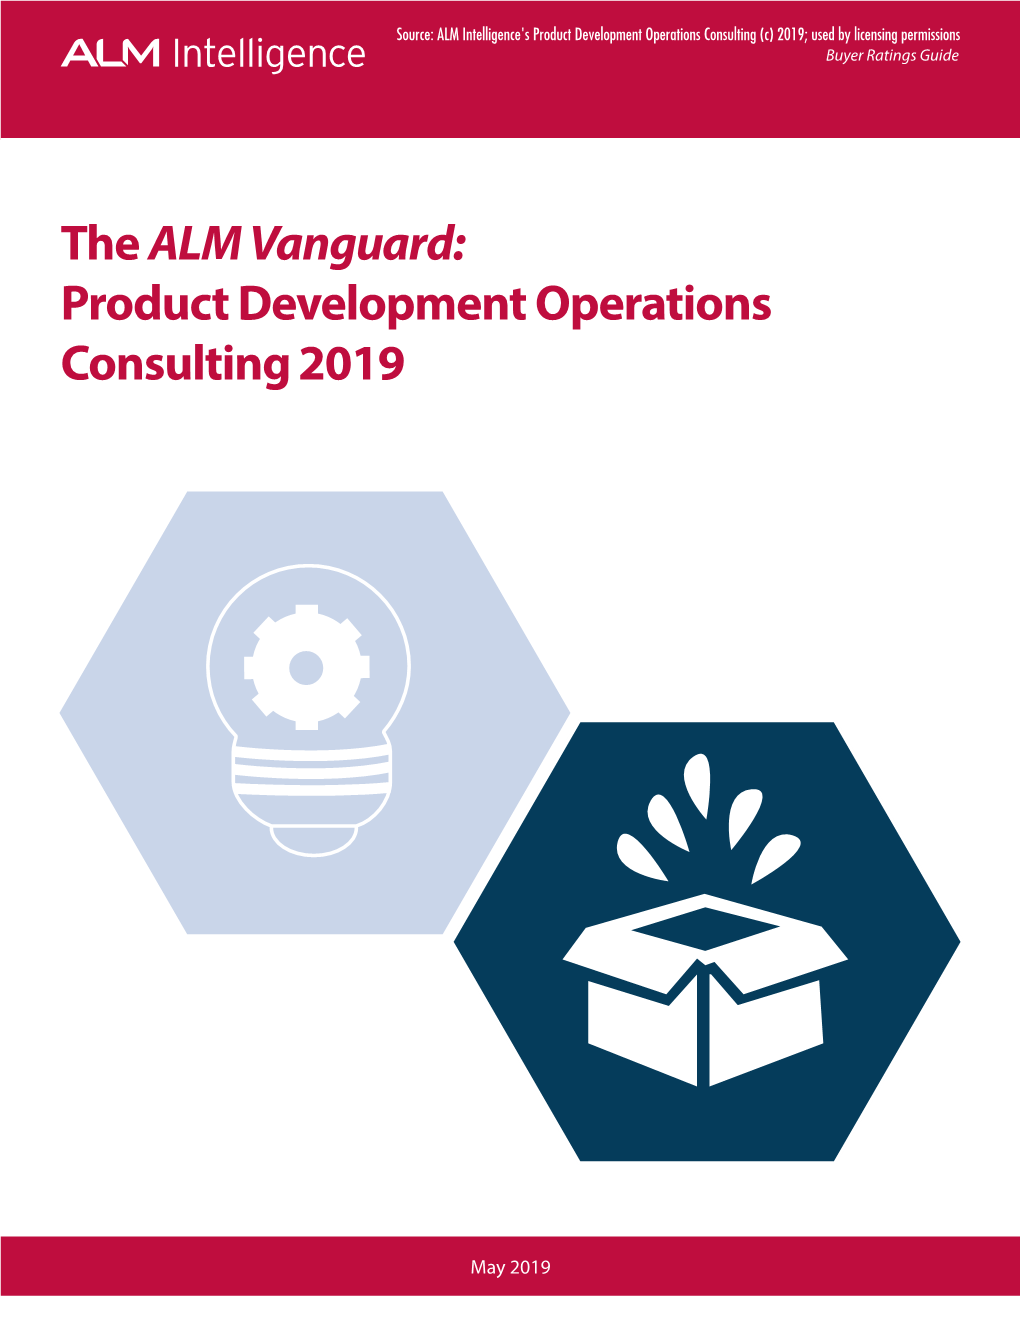 The ALM Vanguard: Product Development Operations Consulting 2019